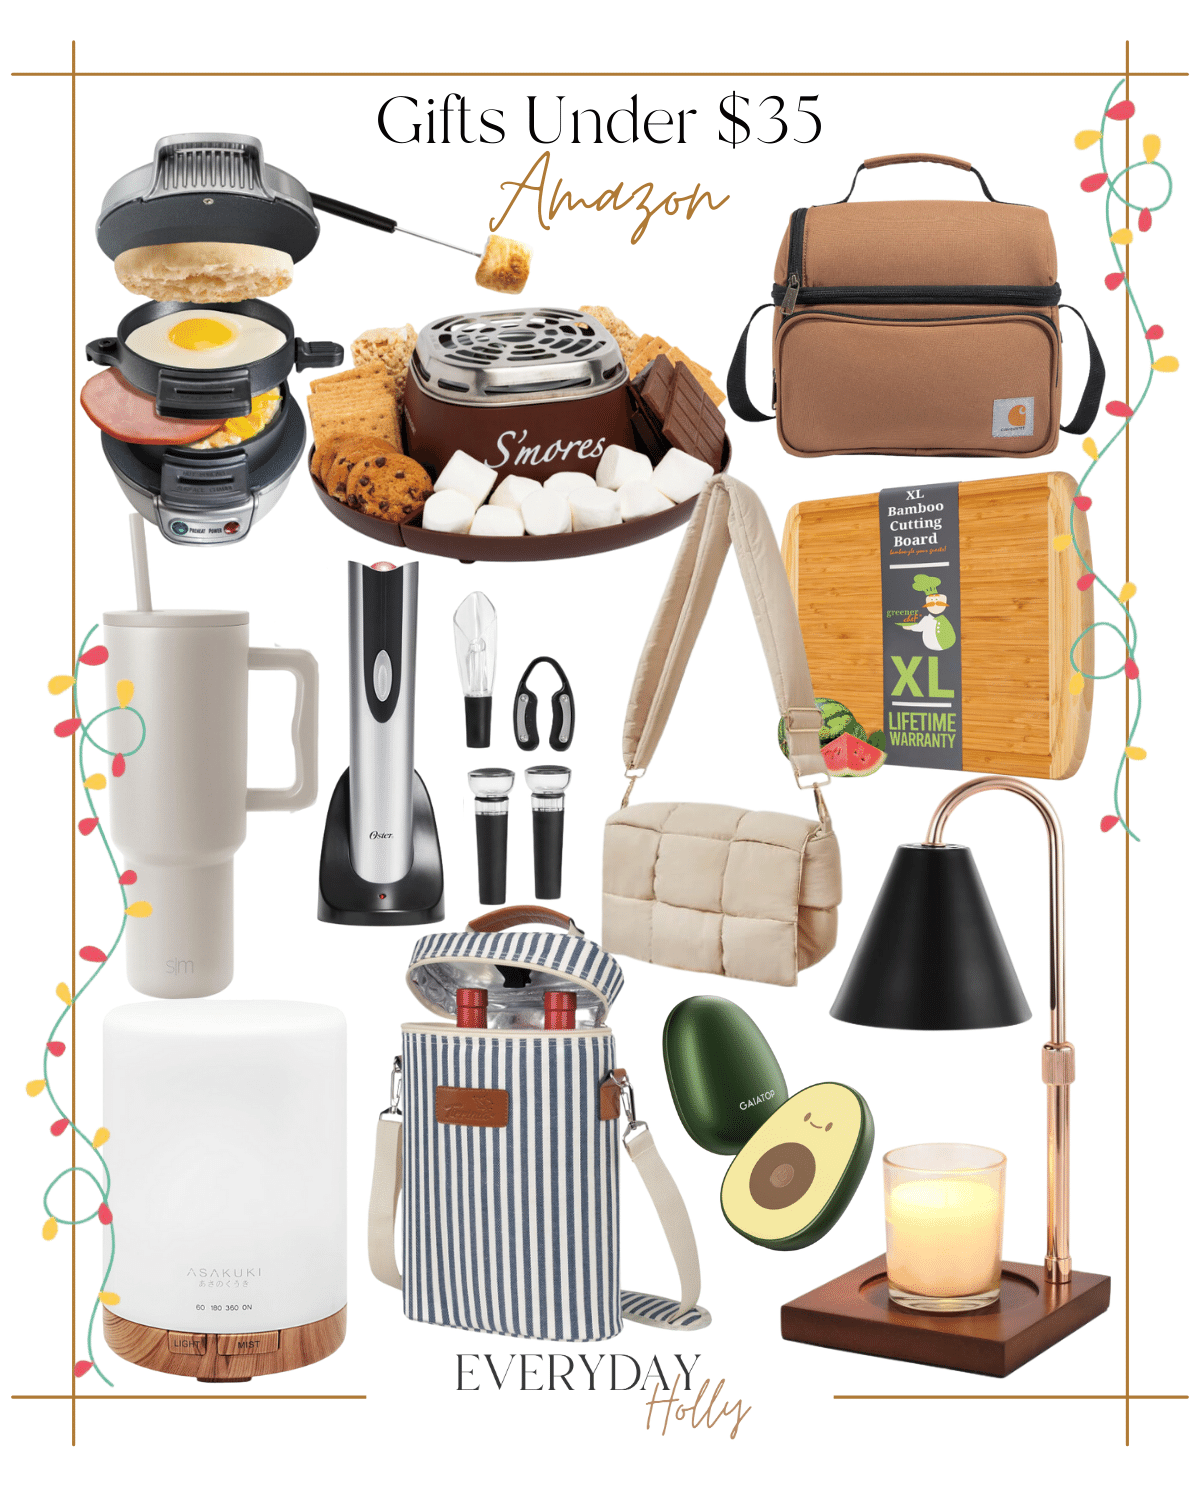 99 last minute gifts under $99 | #last #minute #gifts #giftideas #giftsunder99 #under99 #giftsunder35 #smores #breakfastsandwich #lunchbox #purse #tumbler #wineopener #candle #candlewarmer #wine #essentialoil #diffuser